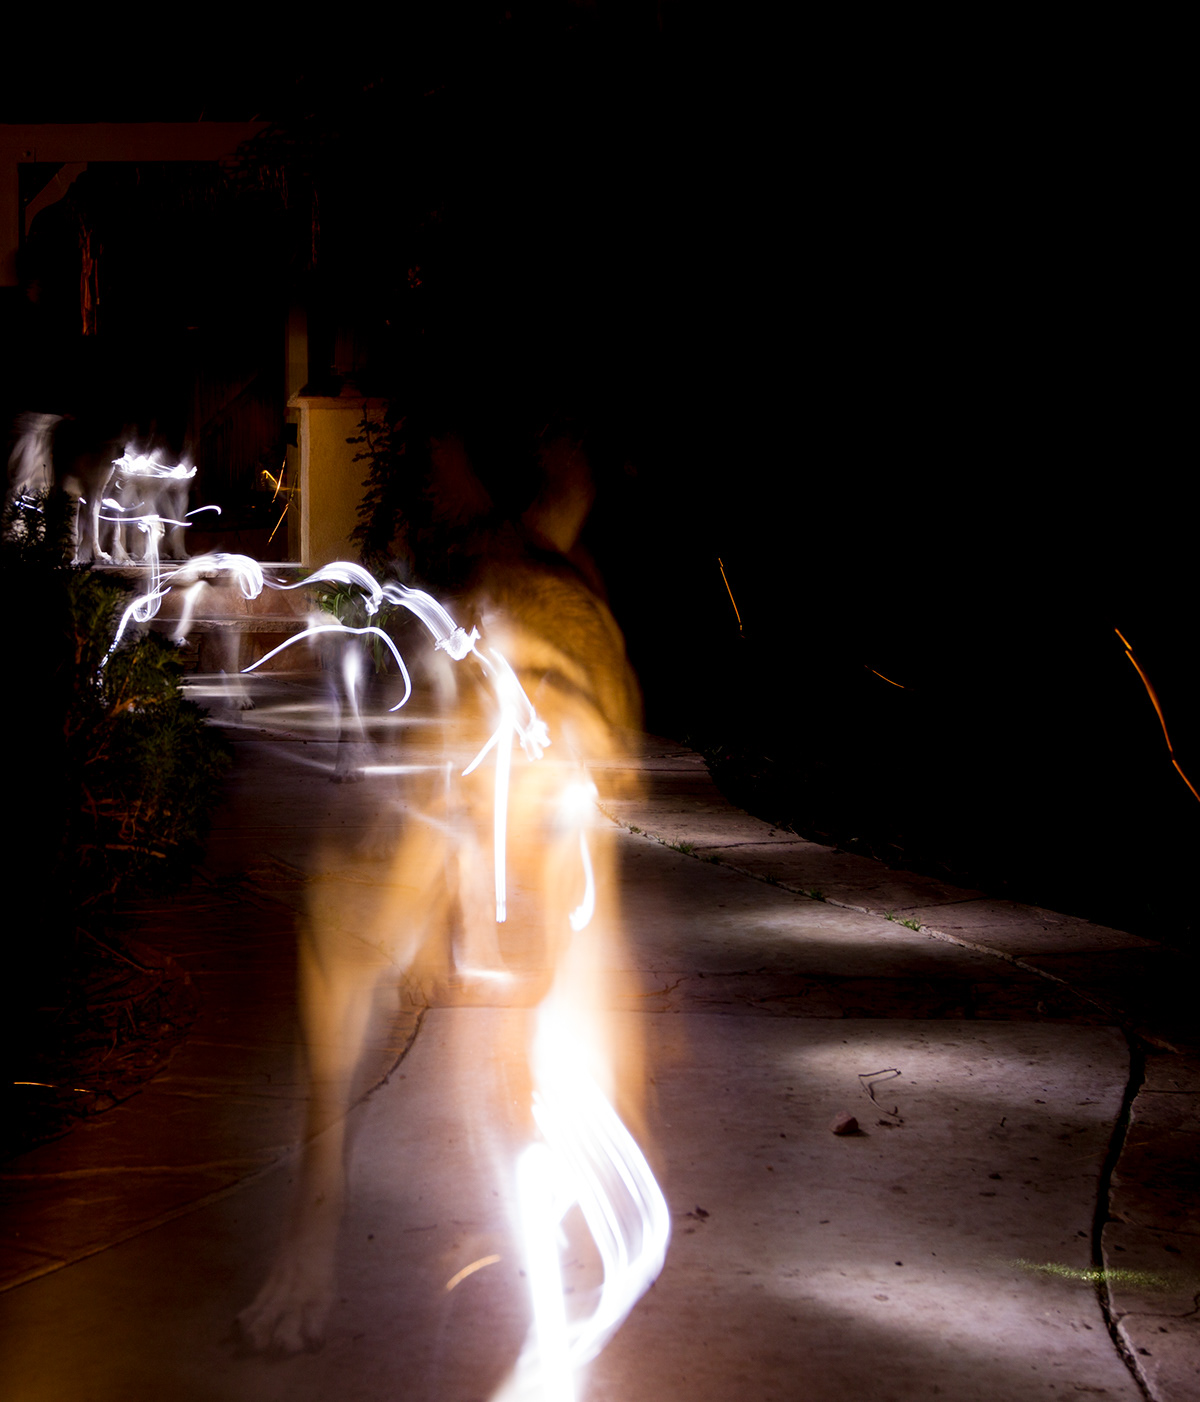 painting with light dogs light suburbia